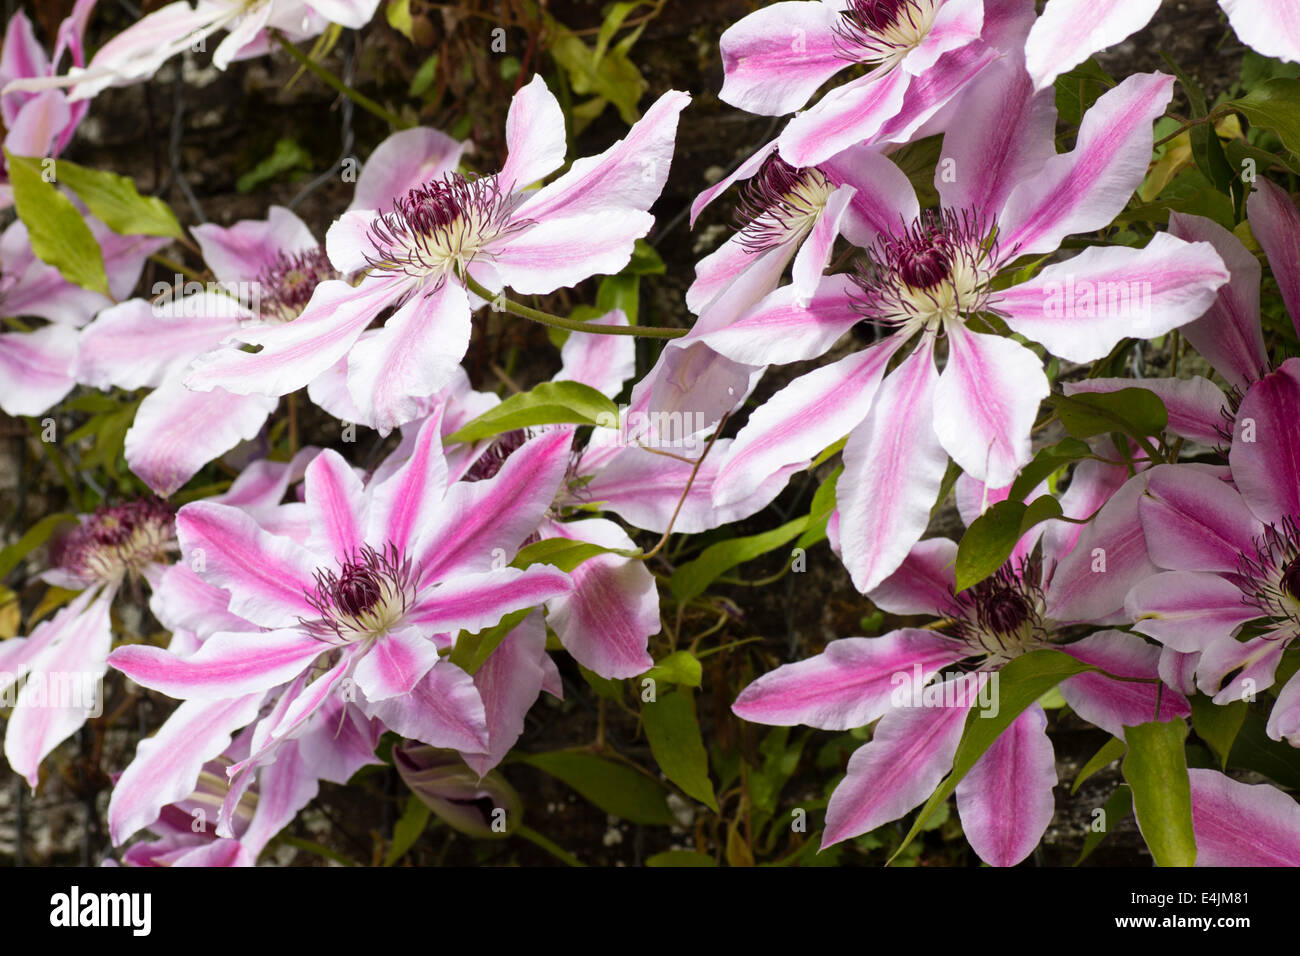 Flowers of the summer flowering climber, Clematis 'Nelly Moser' Stock Photo